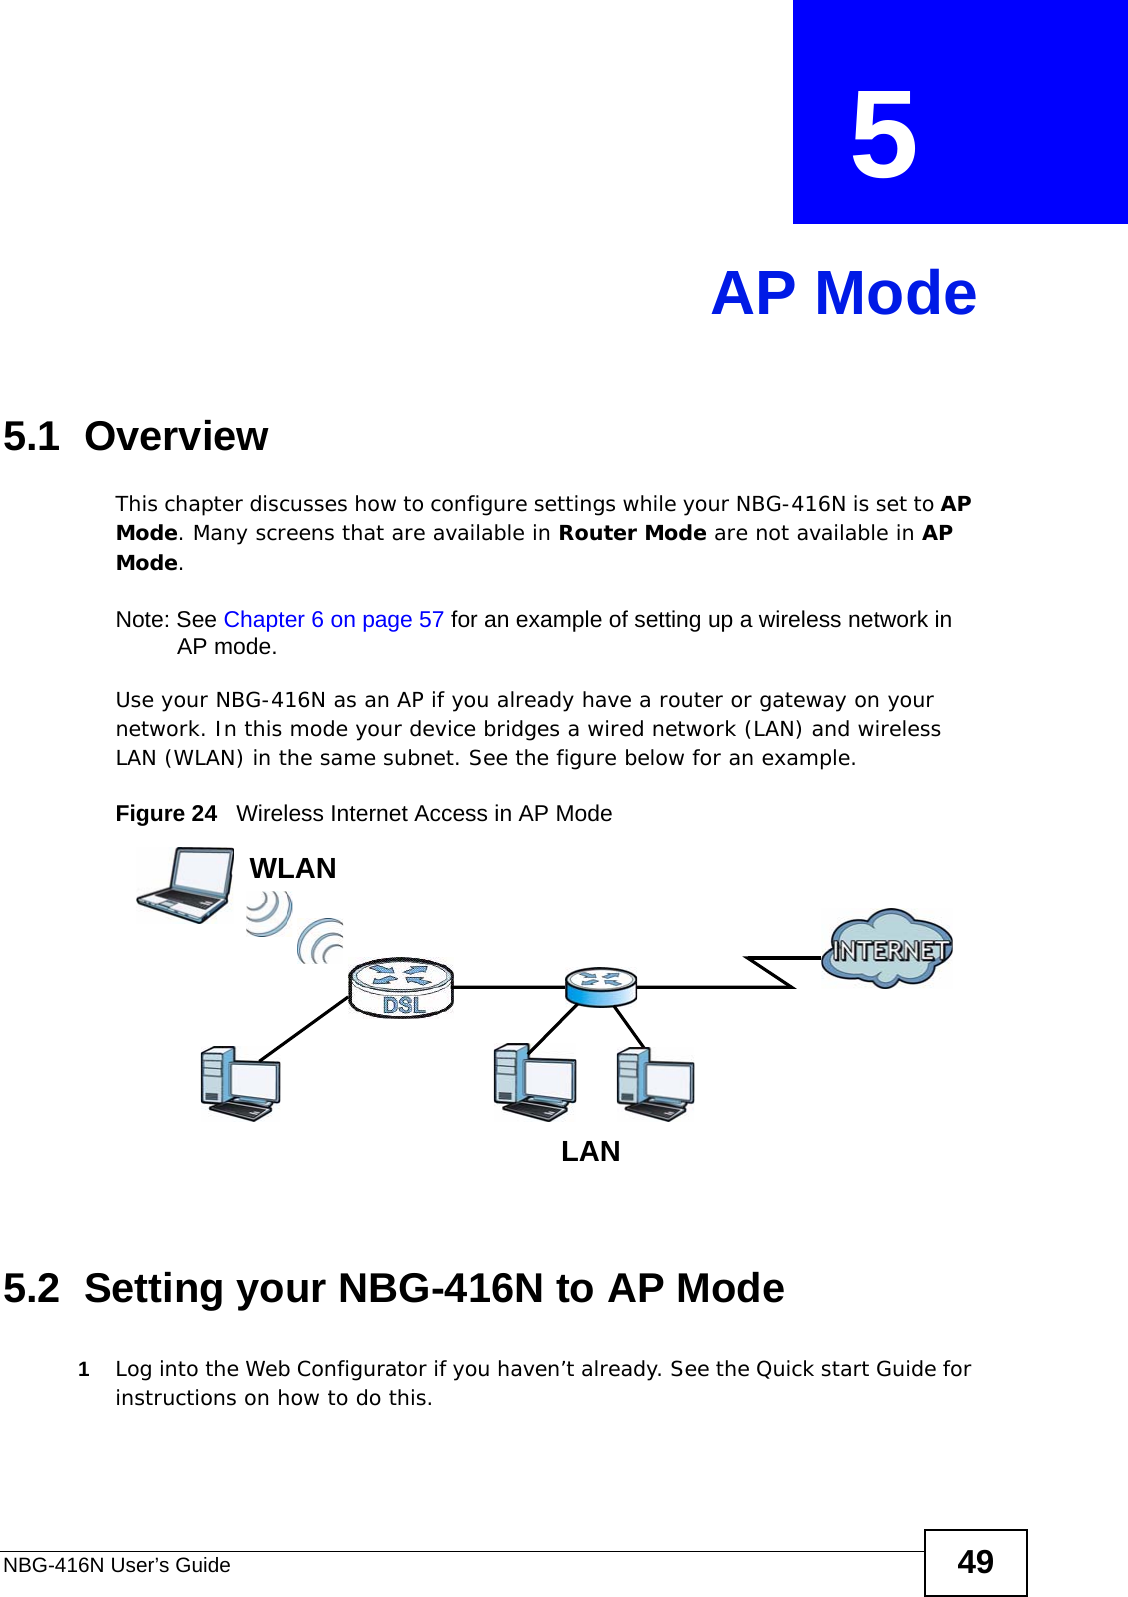 NBG-416N User’s Guide 49CHAPTER  5 AP Mode5.1  OverviewThis chapter discusses how to configure settings while your NBG-416N is set to AP Mode. Many screens that are available in Router Mode are not available in AP Mode.Note: See Chapter 6 on page 57 for an example of setting up a wireless network in AP mode. Use your NBG-416N as an AP if you already have a router or gateway on your network. In this mode your device bridges a wired network (LAN) and wireless LAN (WLAN) in the same subnet. See the figure below for an example.Figure 24   Wireless Internet Access in AP Mode 5.2  Setting your NBG-416N to AP Mode1Log into the Web Configurator if you haven’t already. See the Quick start Guide for instructions on how to do this.LEWWLANLAN